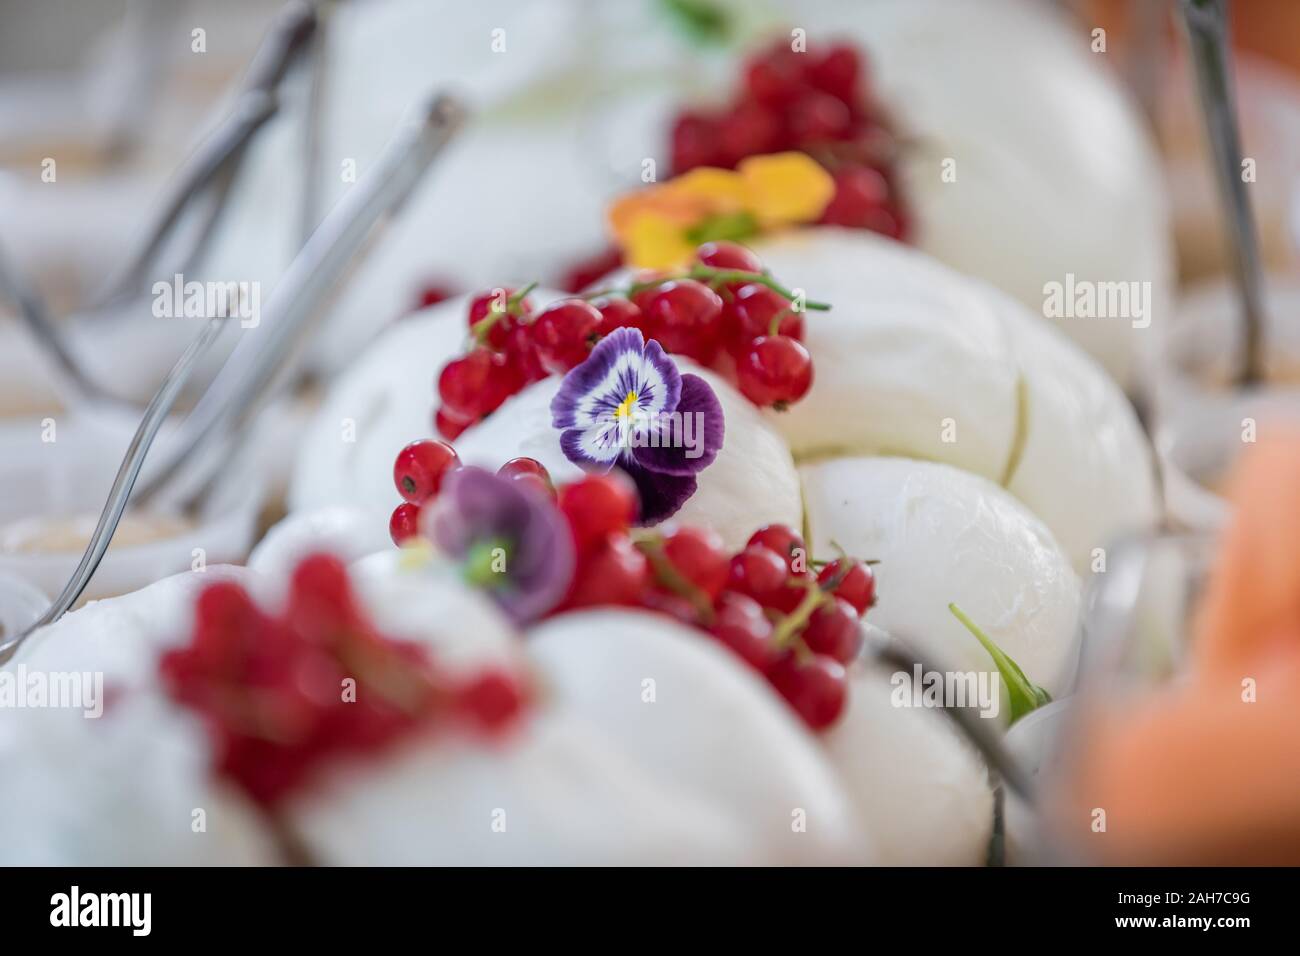 A gourmet composition consisting in row of loaves of mozzarella cheese topped with berries and flowers Stock Photo